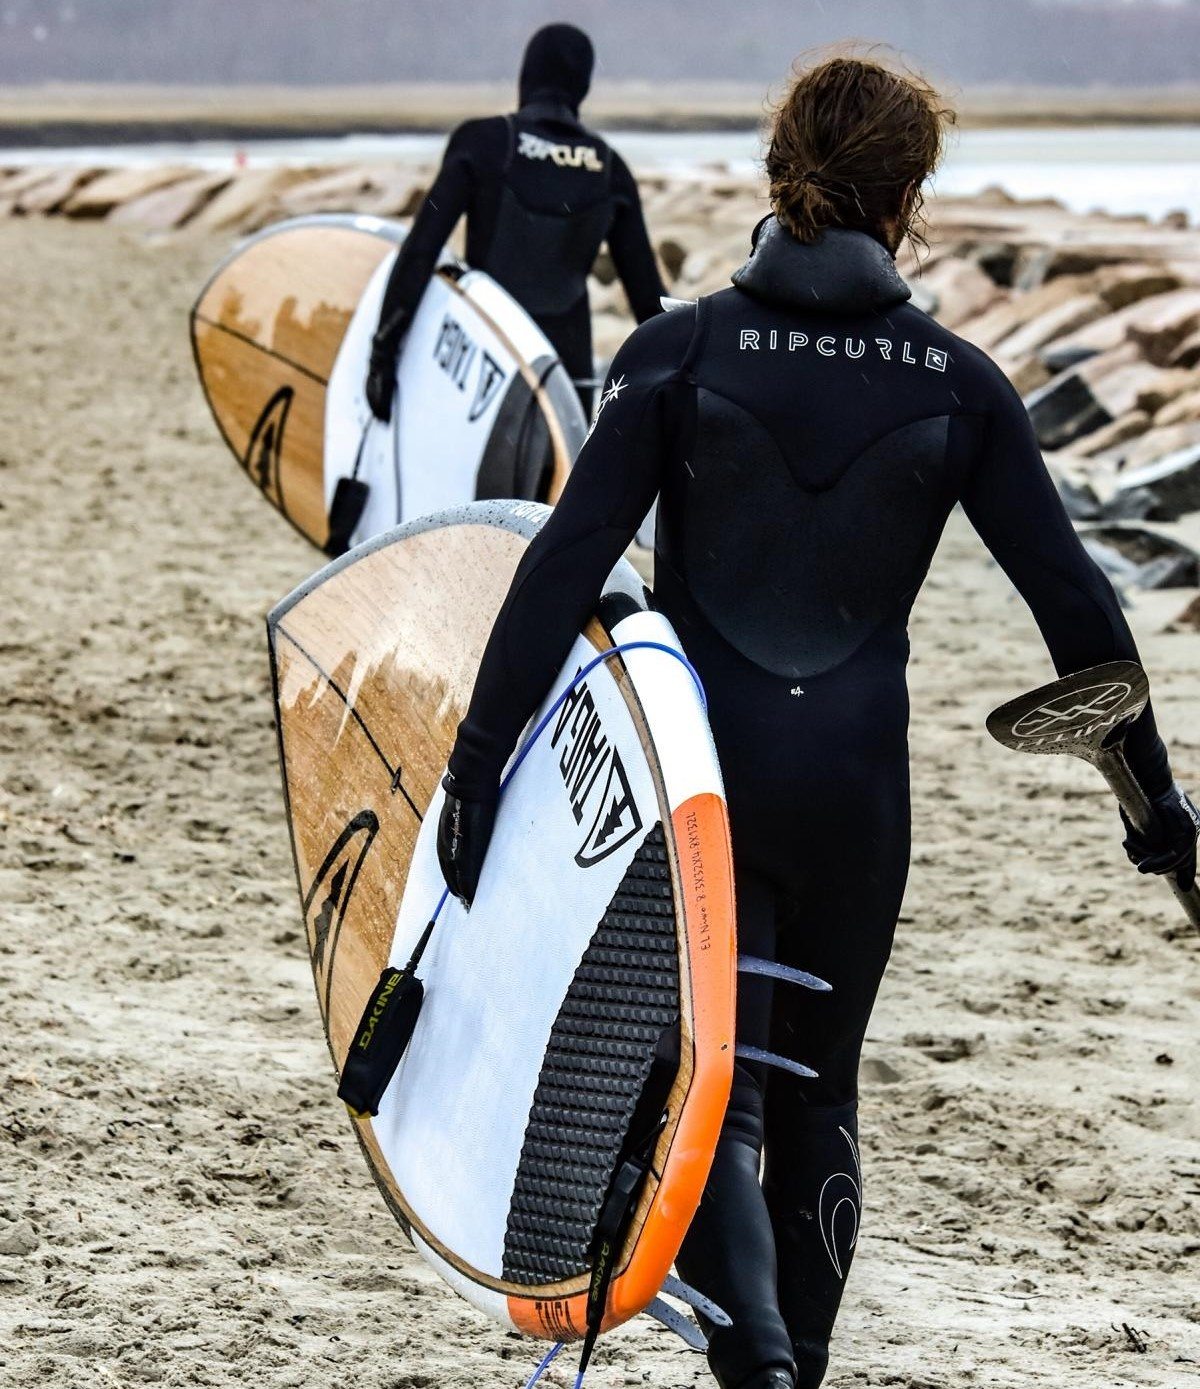 two surfers at the beach with same interest